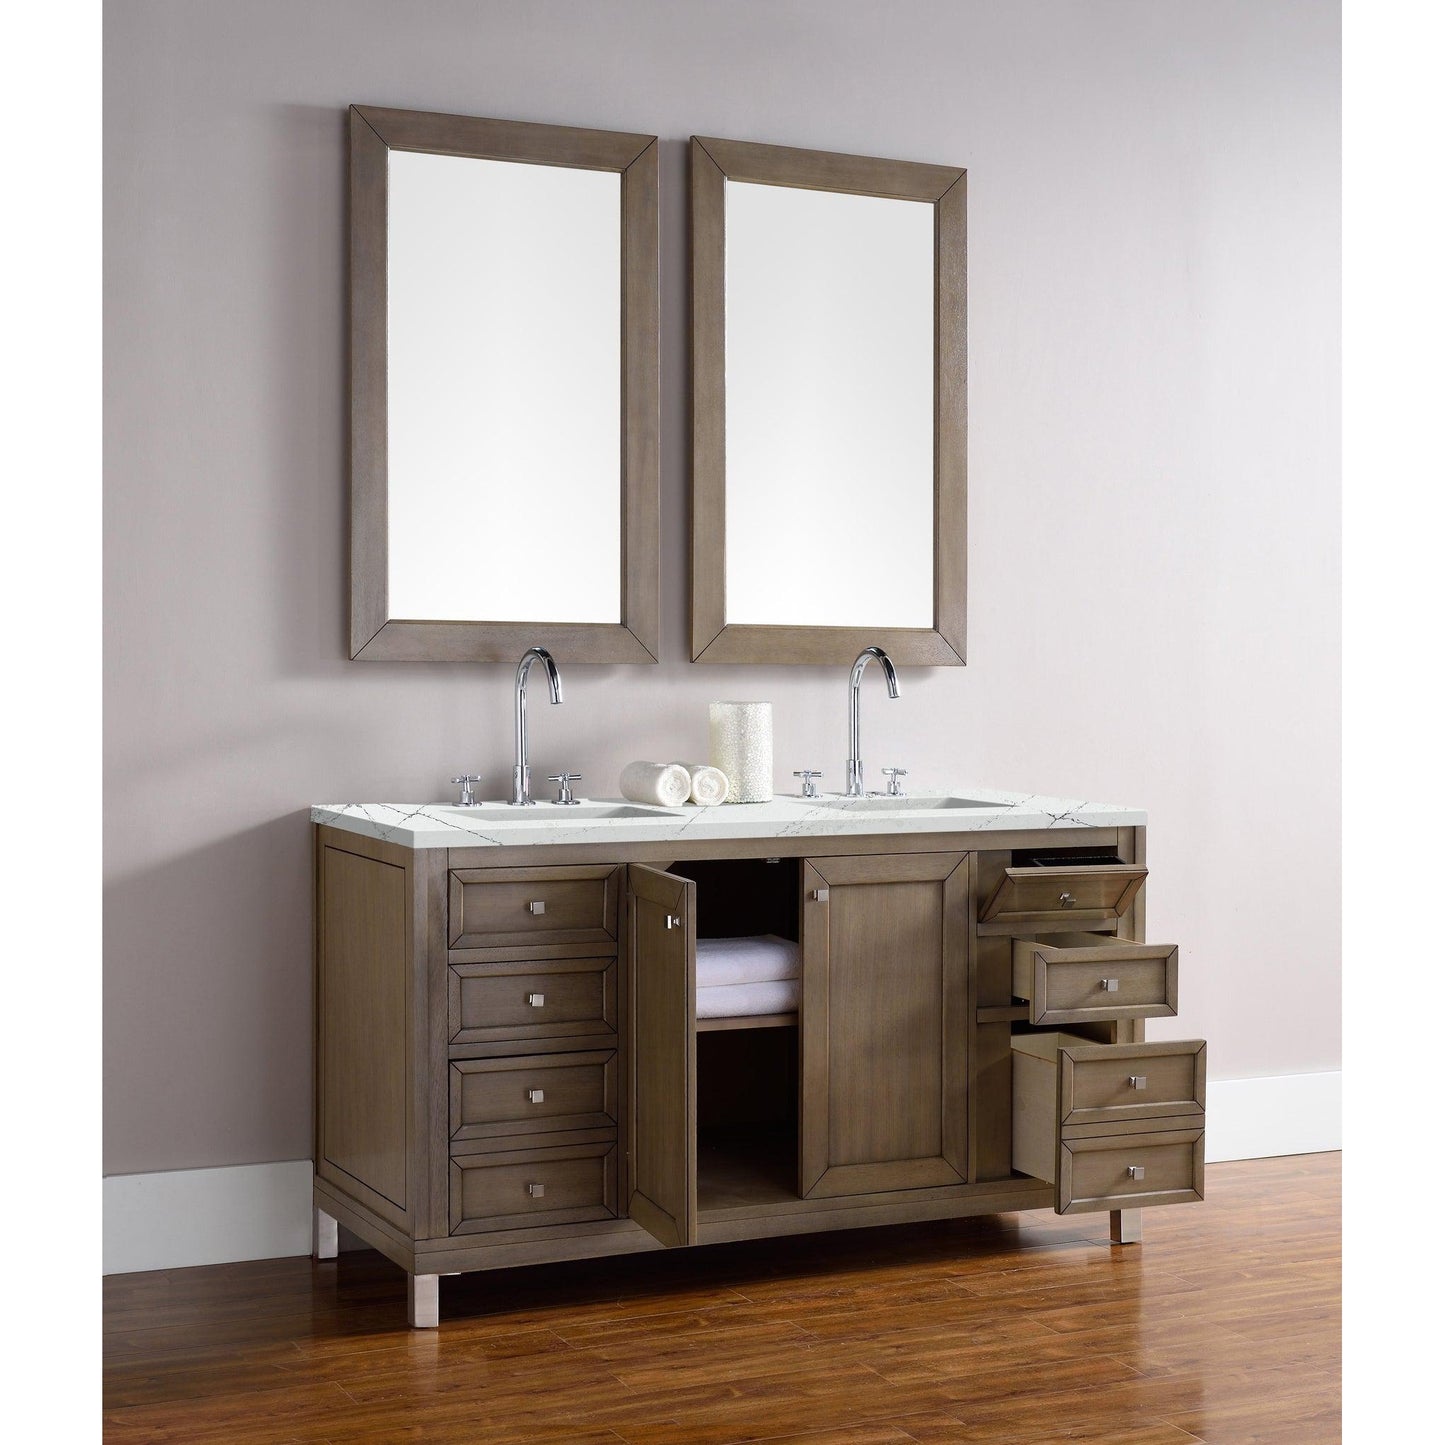 James Martin Chicago 60" Double Whitewashed Walnut Bathroom Vanity With 1" Ethereal Noctis Quartz Top and Rectangular Ceramic Sink